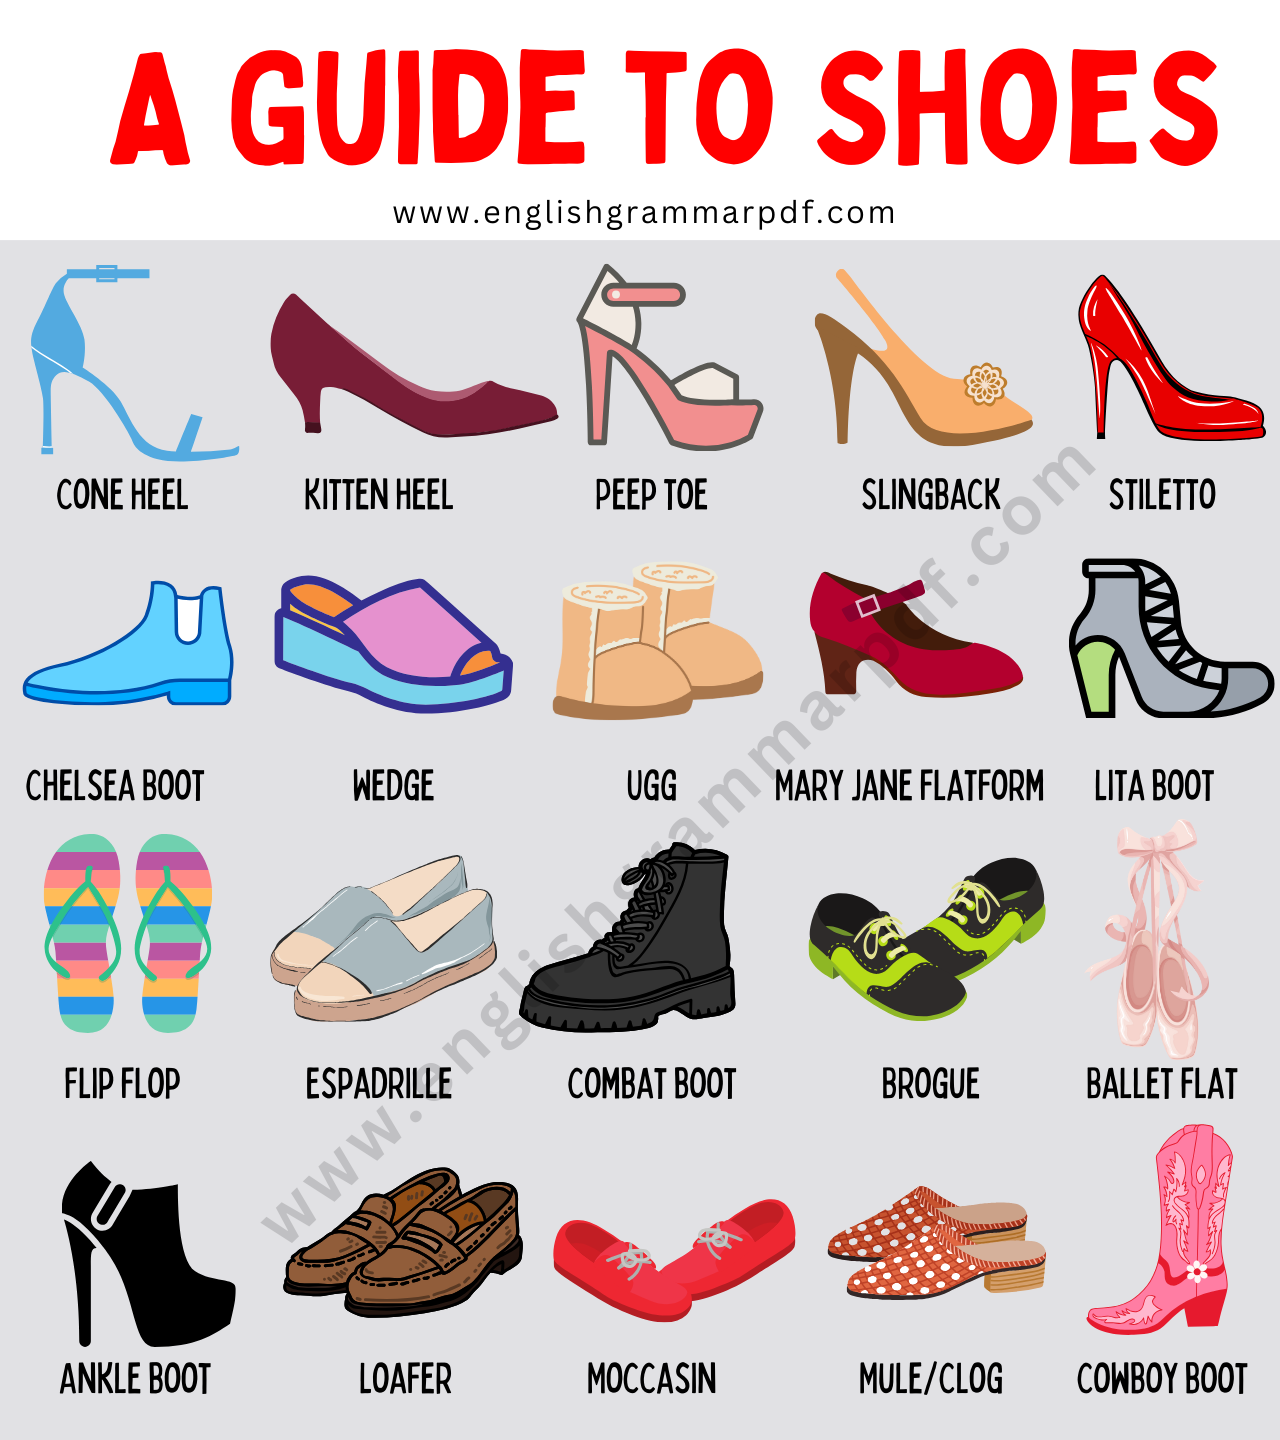 Types of Shoes